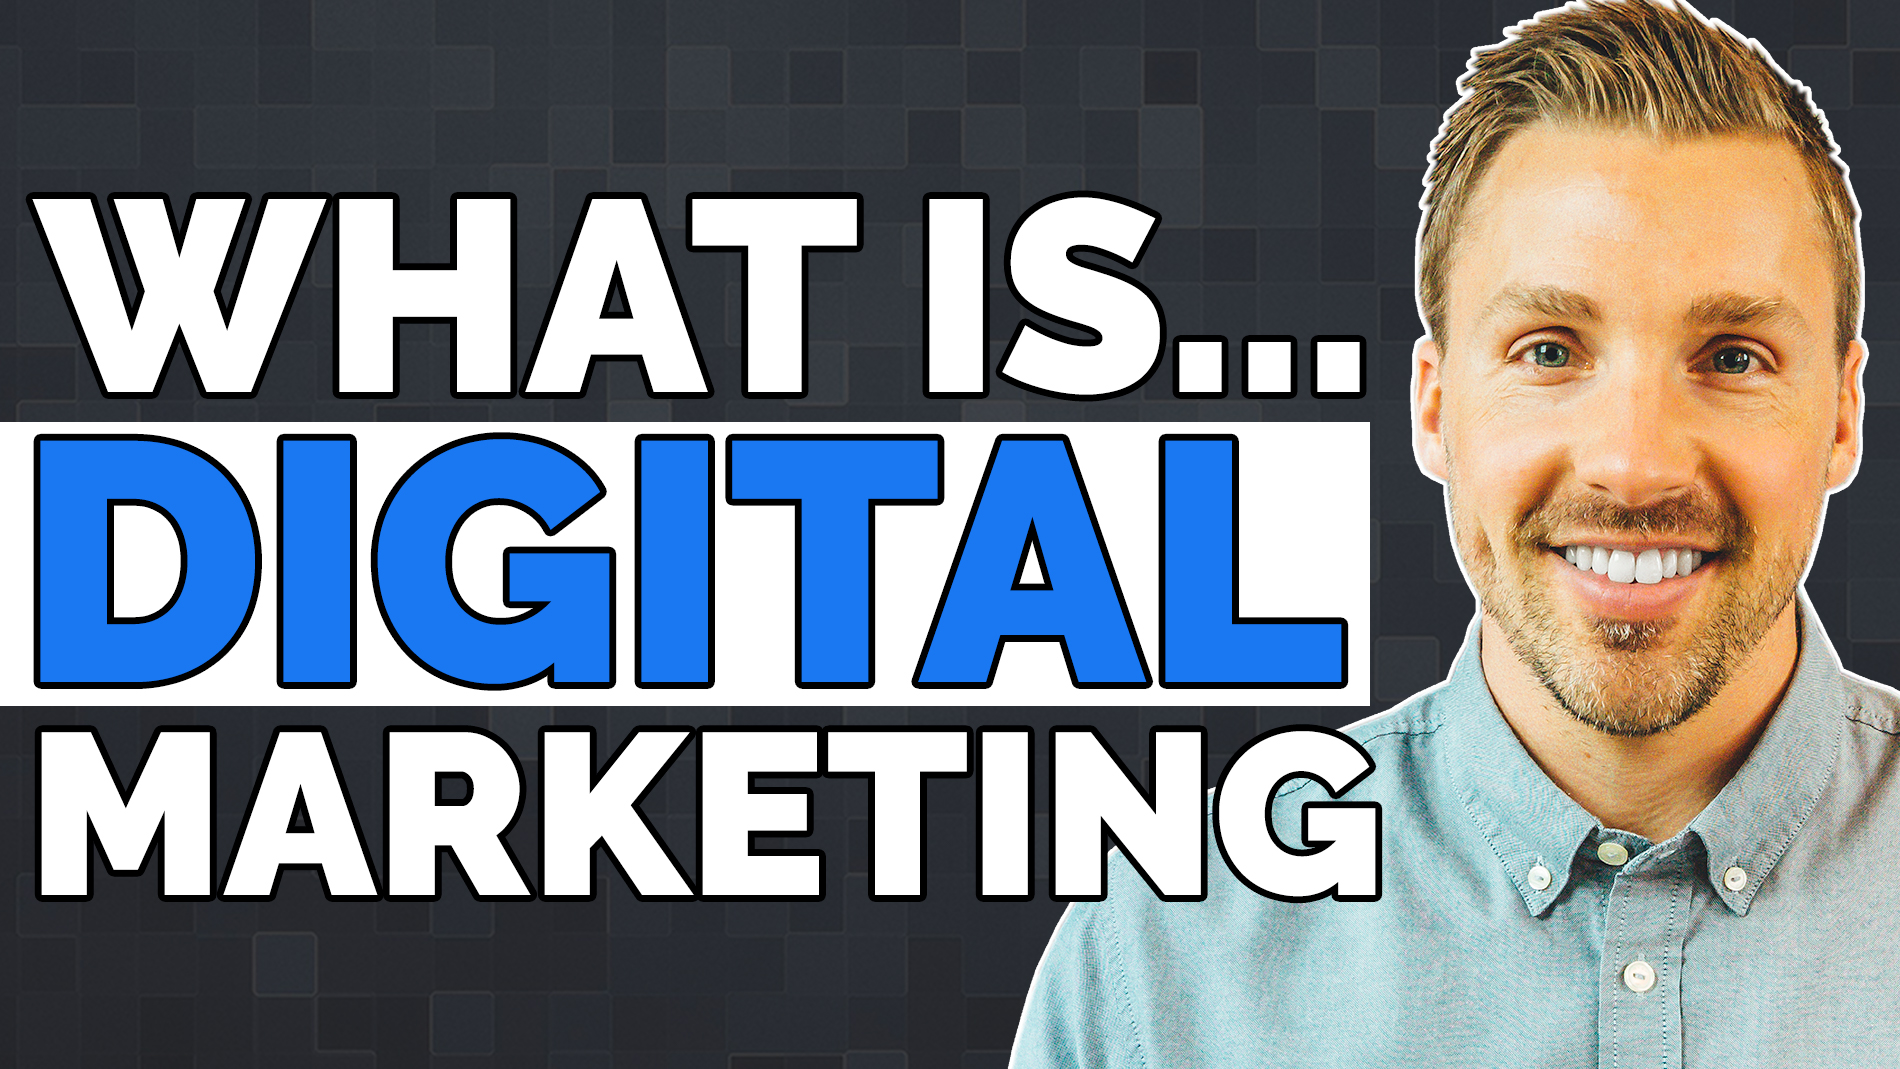 What Is Digital Marketing? And How Does It Work? (2019)